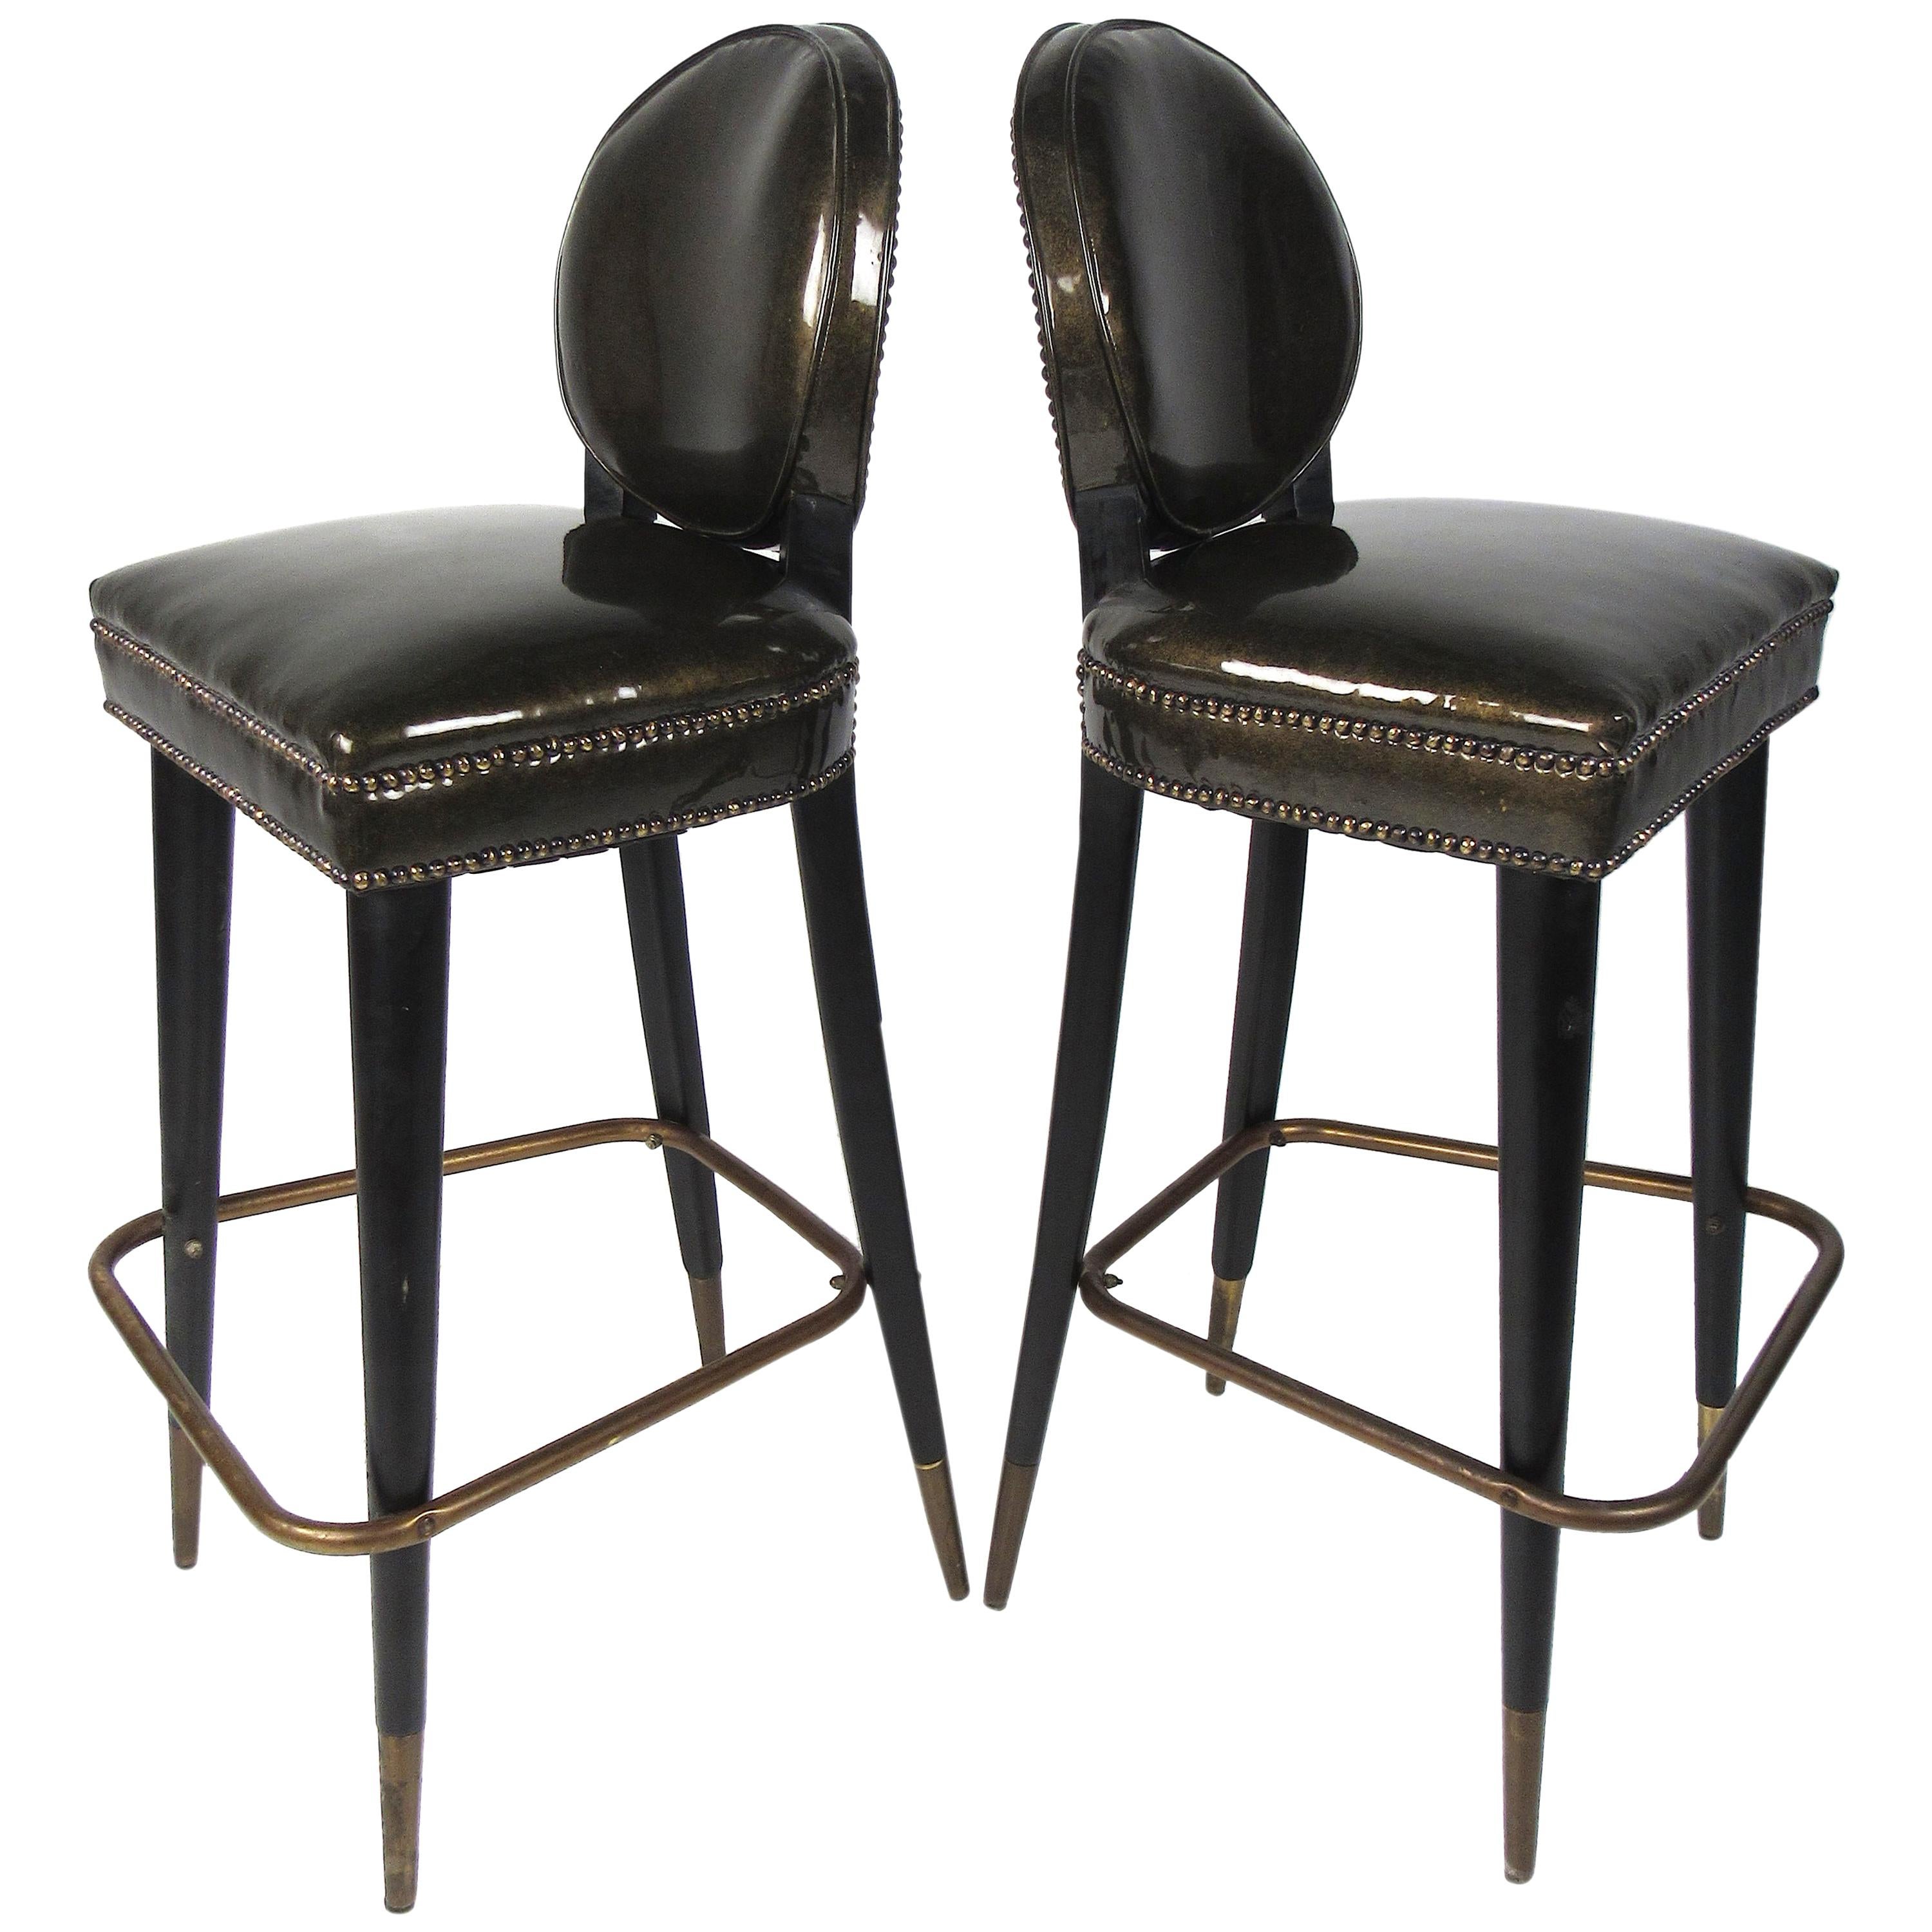 Pair of Vintage Regency Style Bar Stools with Brass Accents